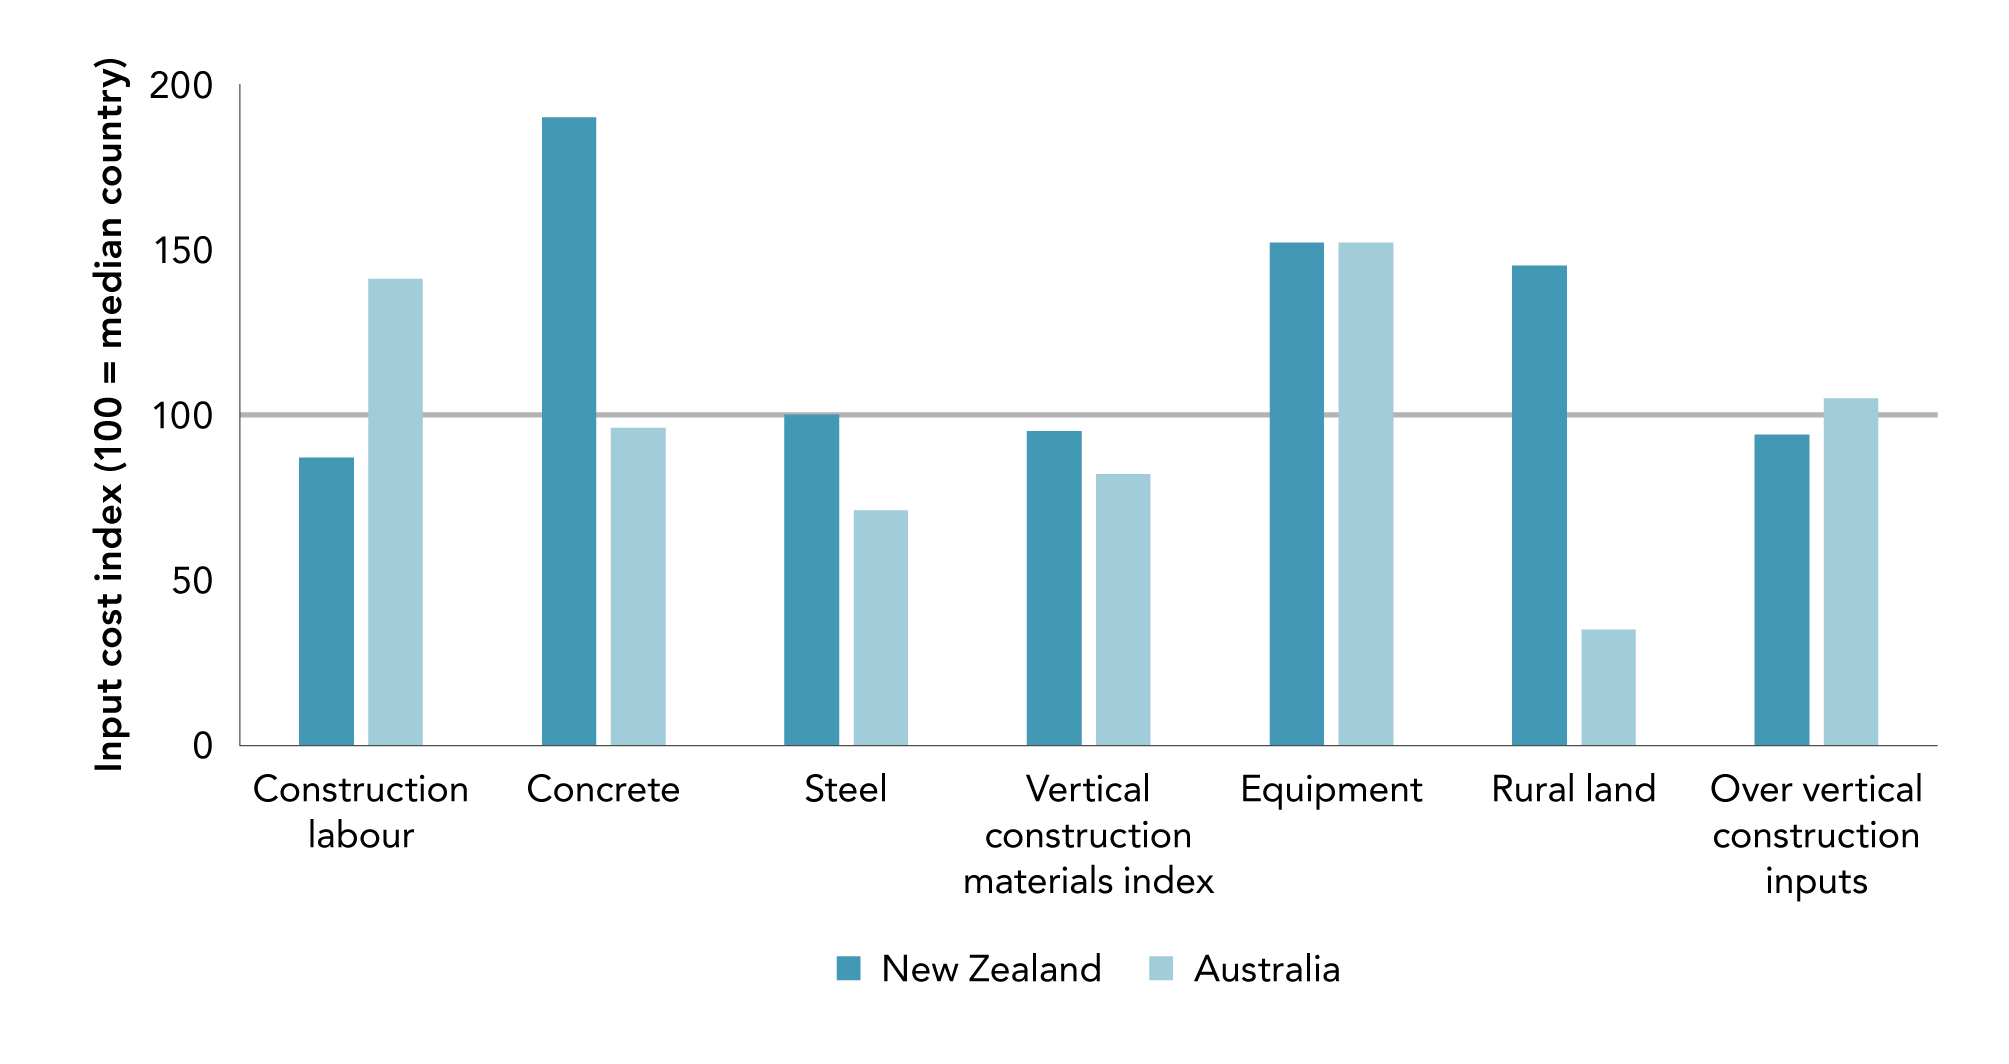 Figure 4.19 Aotearoa New Zealand and Australias construction input costs relative to ten other high income countries